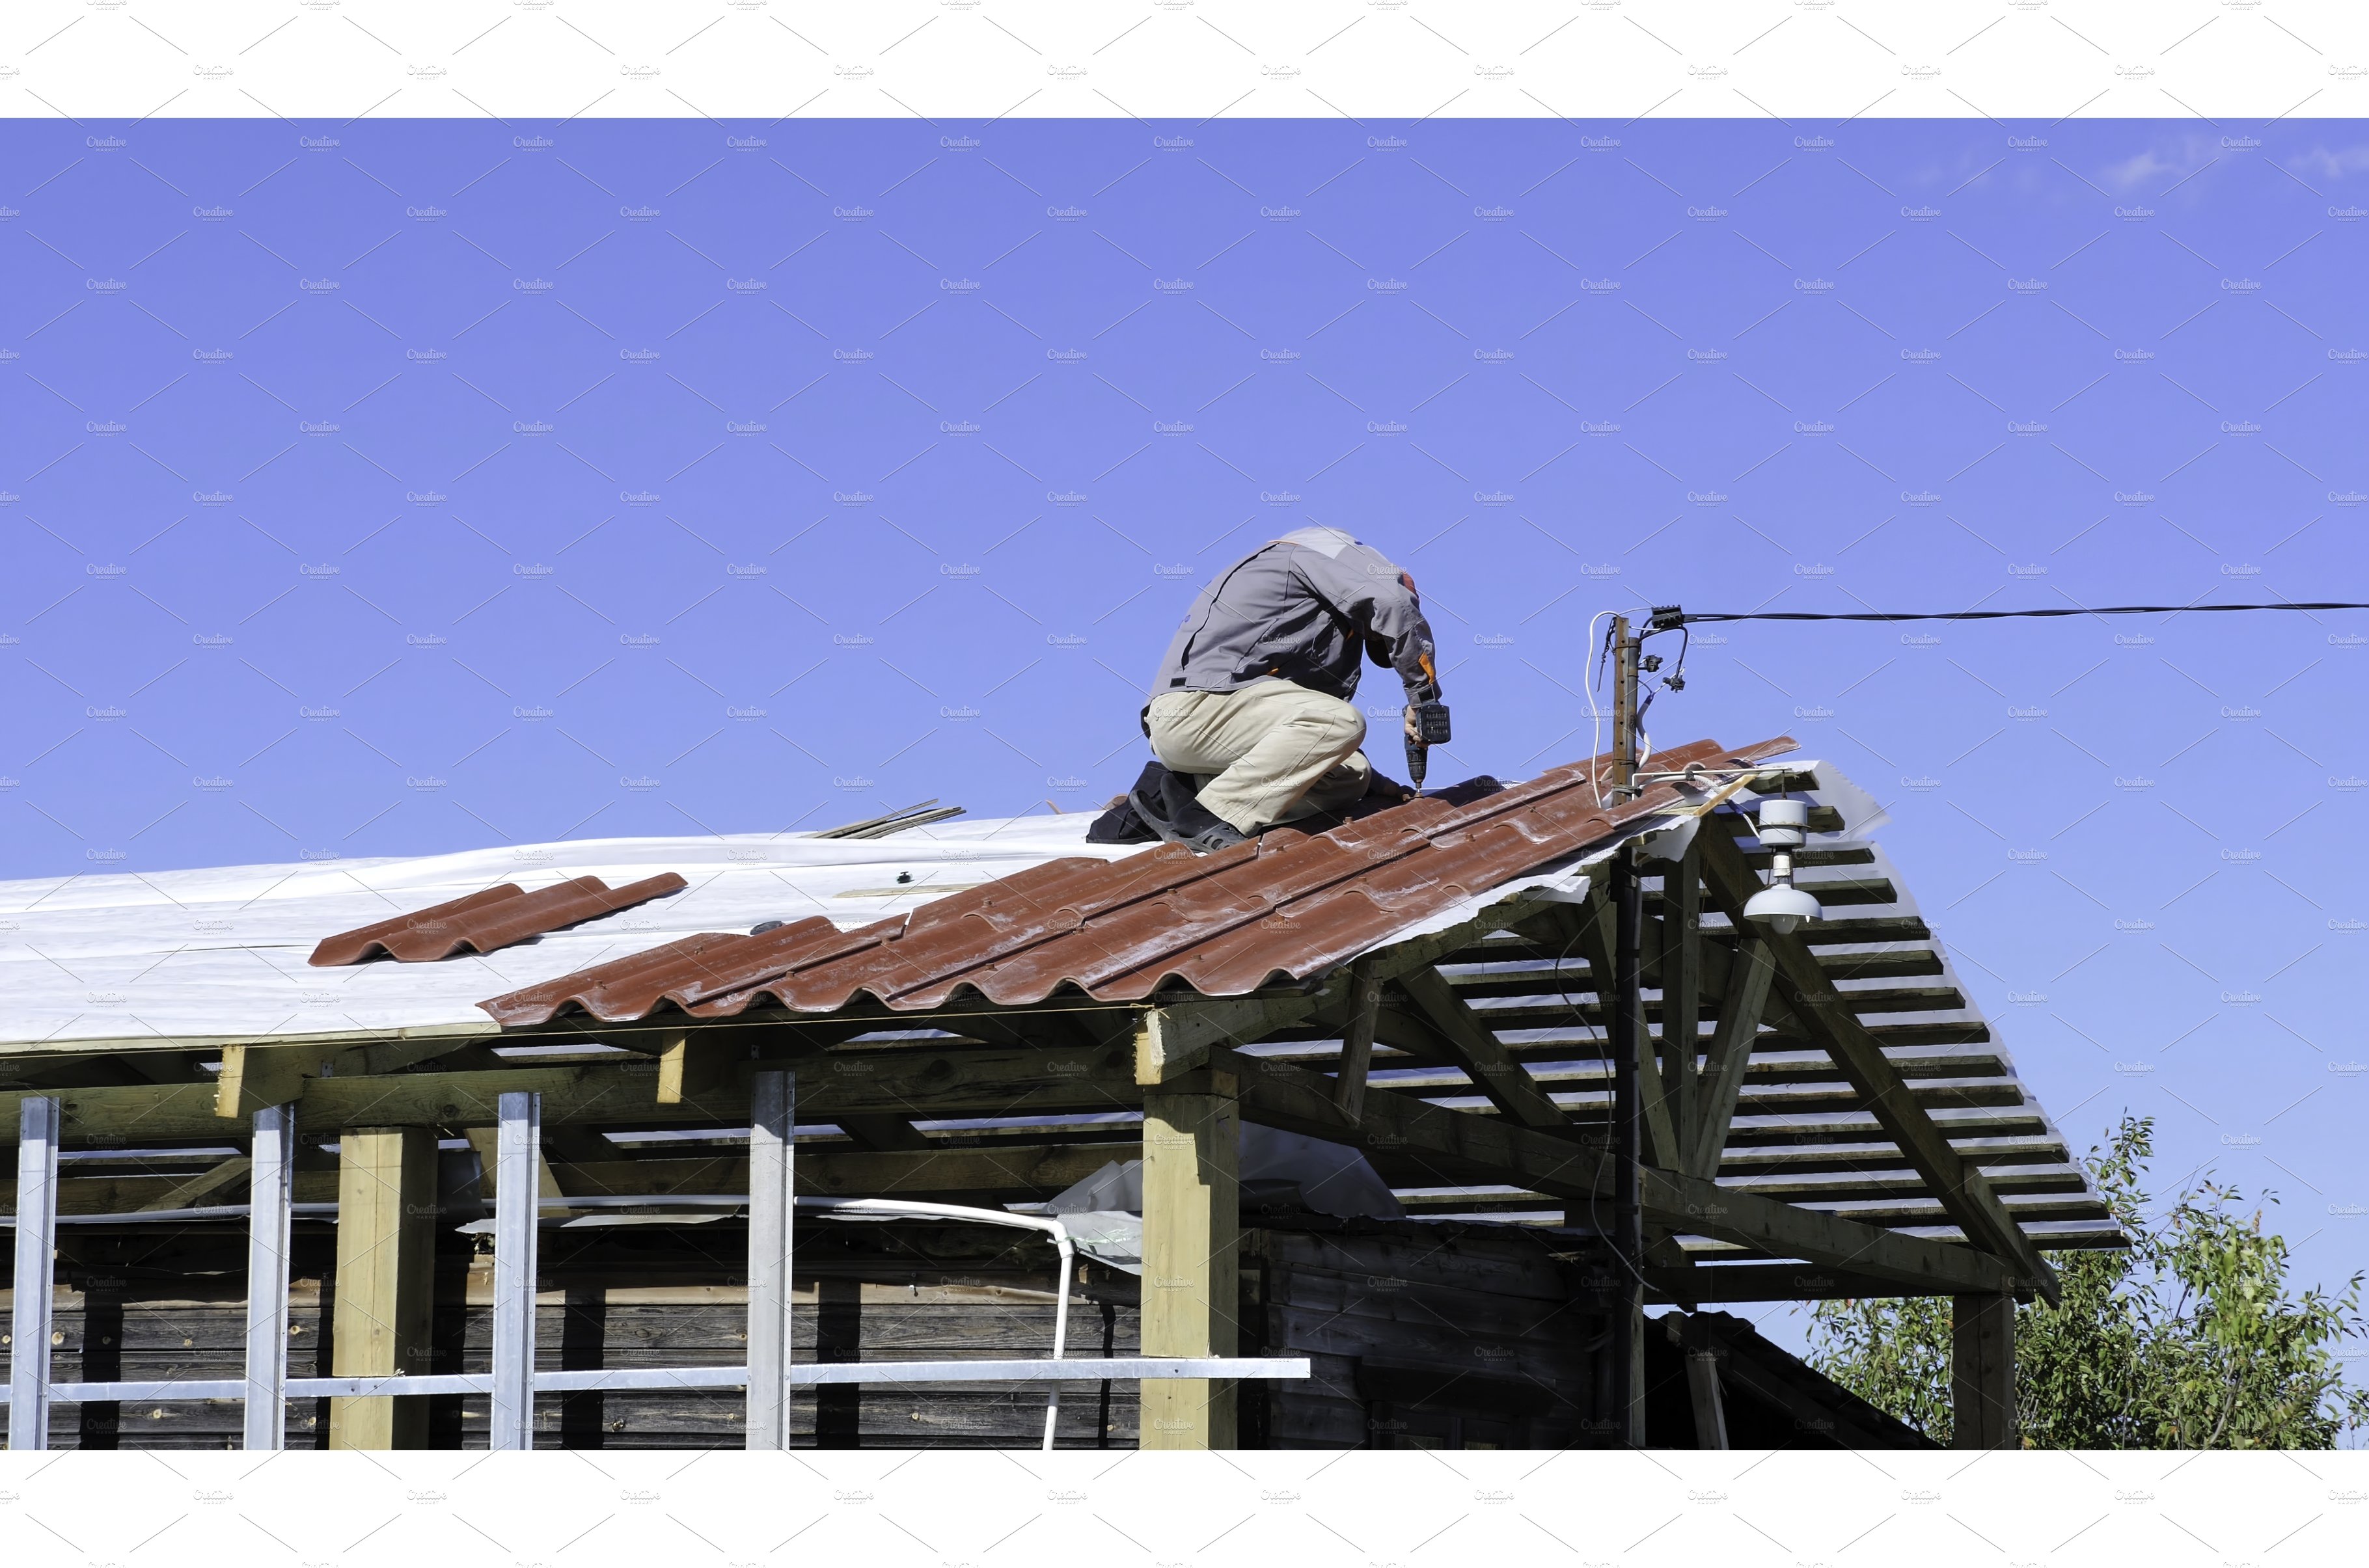 Man screws a screw into the roof cover image.